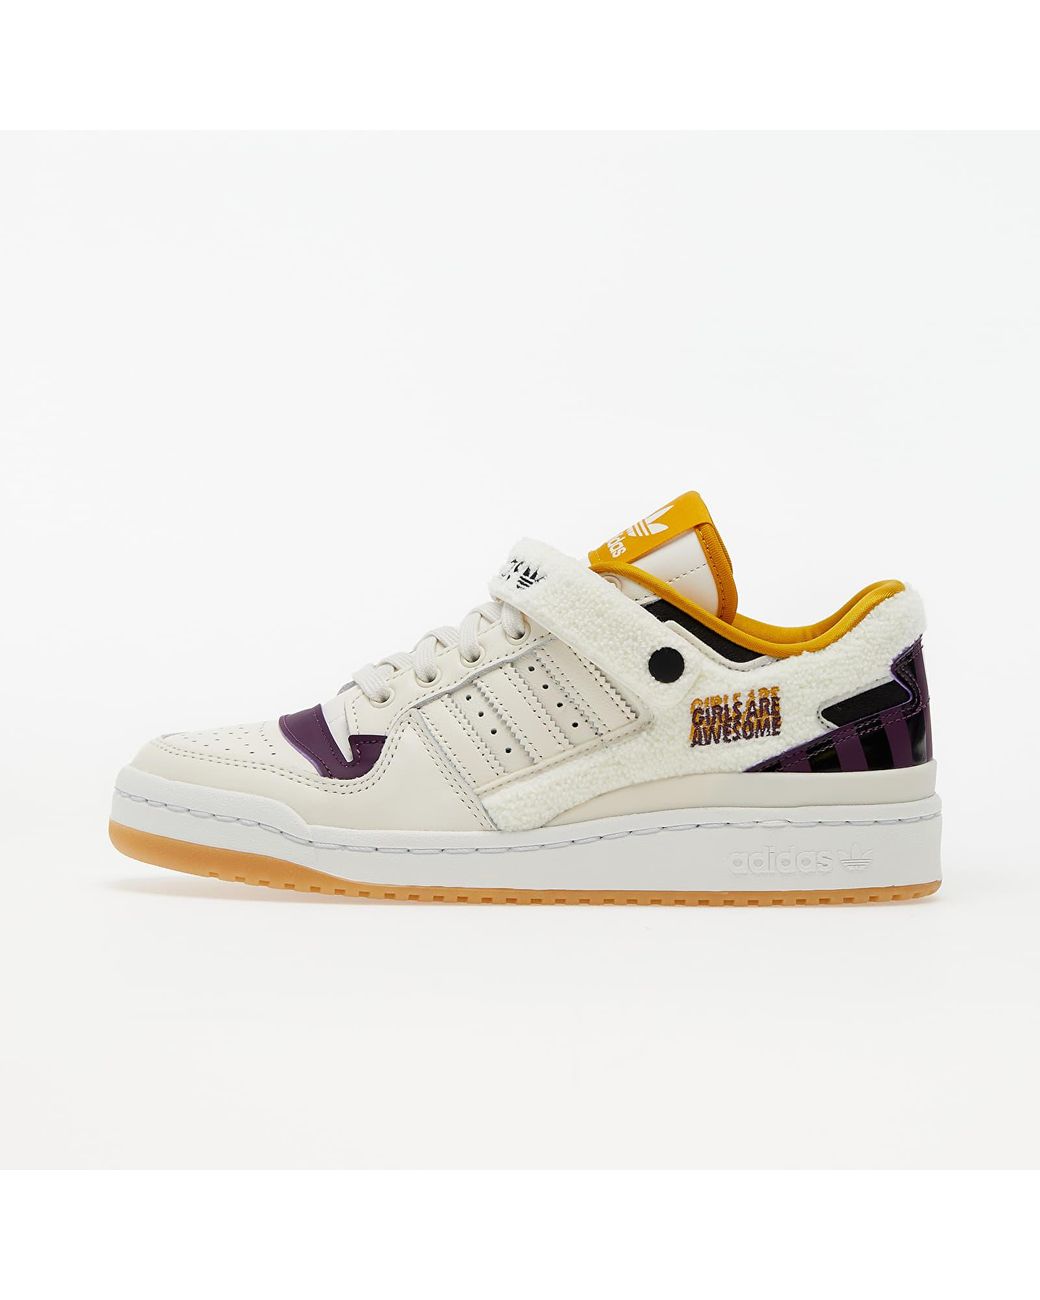 Adidas Forum Low W Girls Are Awesome Chalk White/ Core Black/ Purple Beauty  di adidas Originals | Lyst